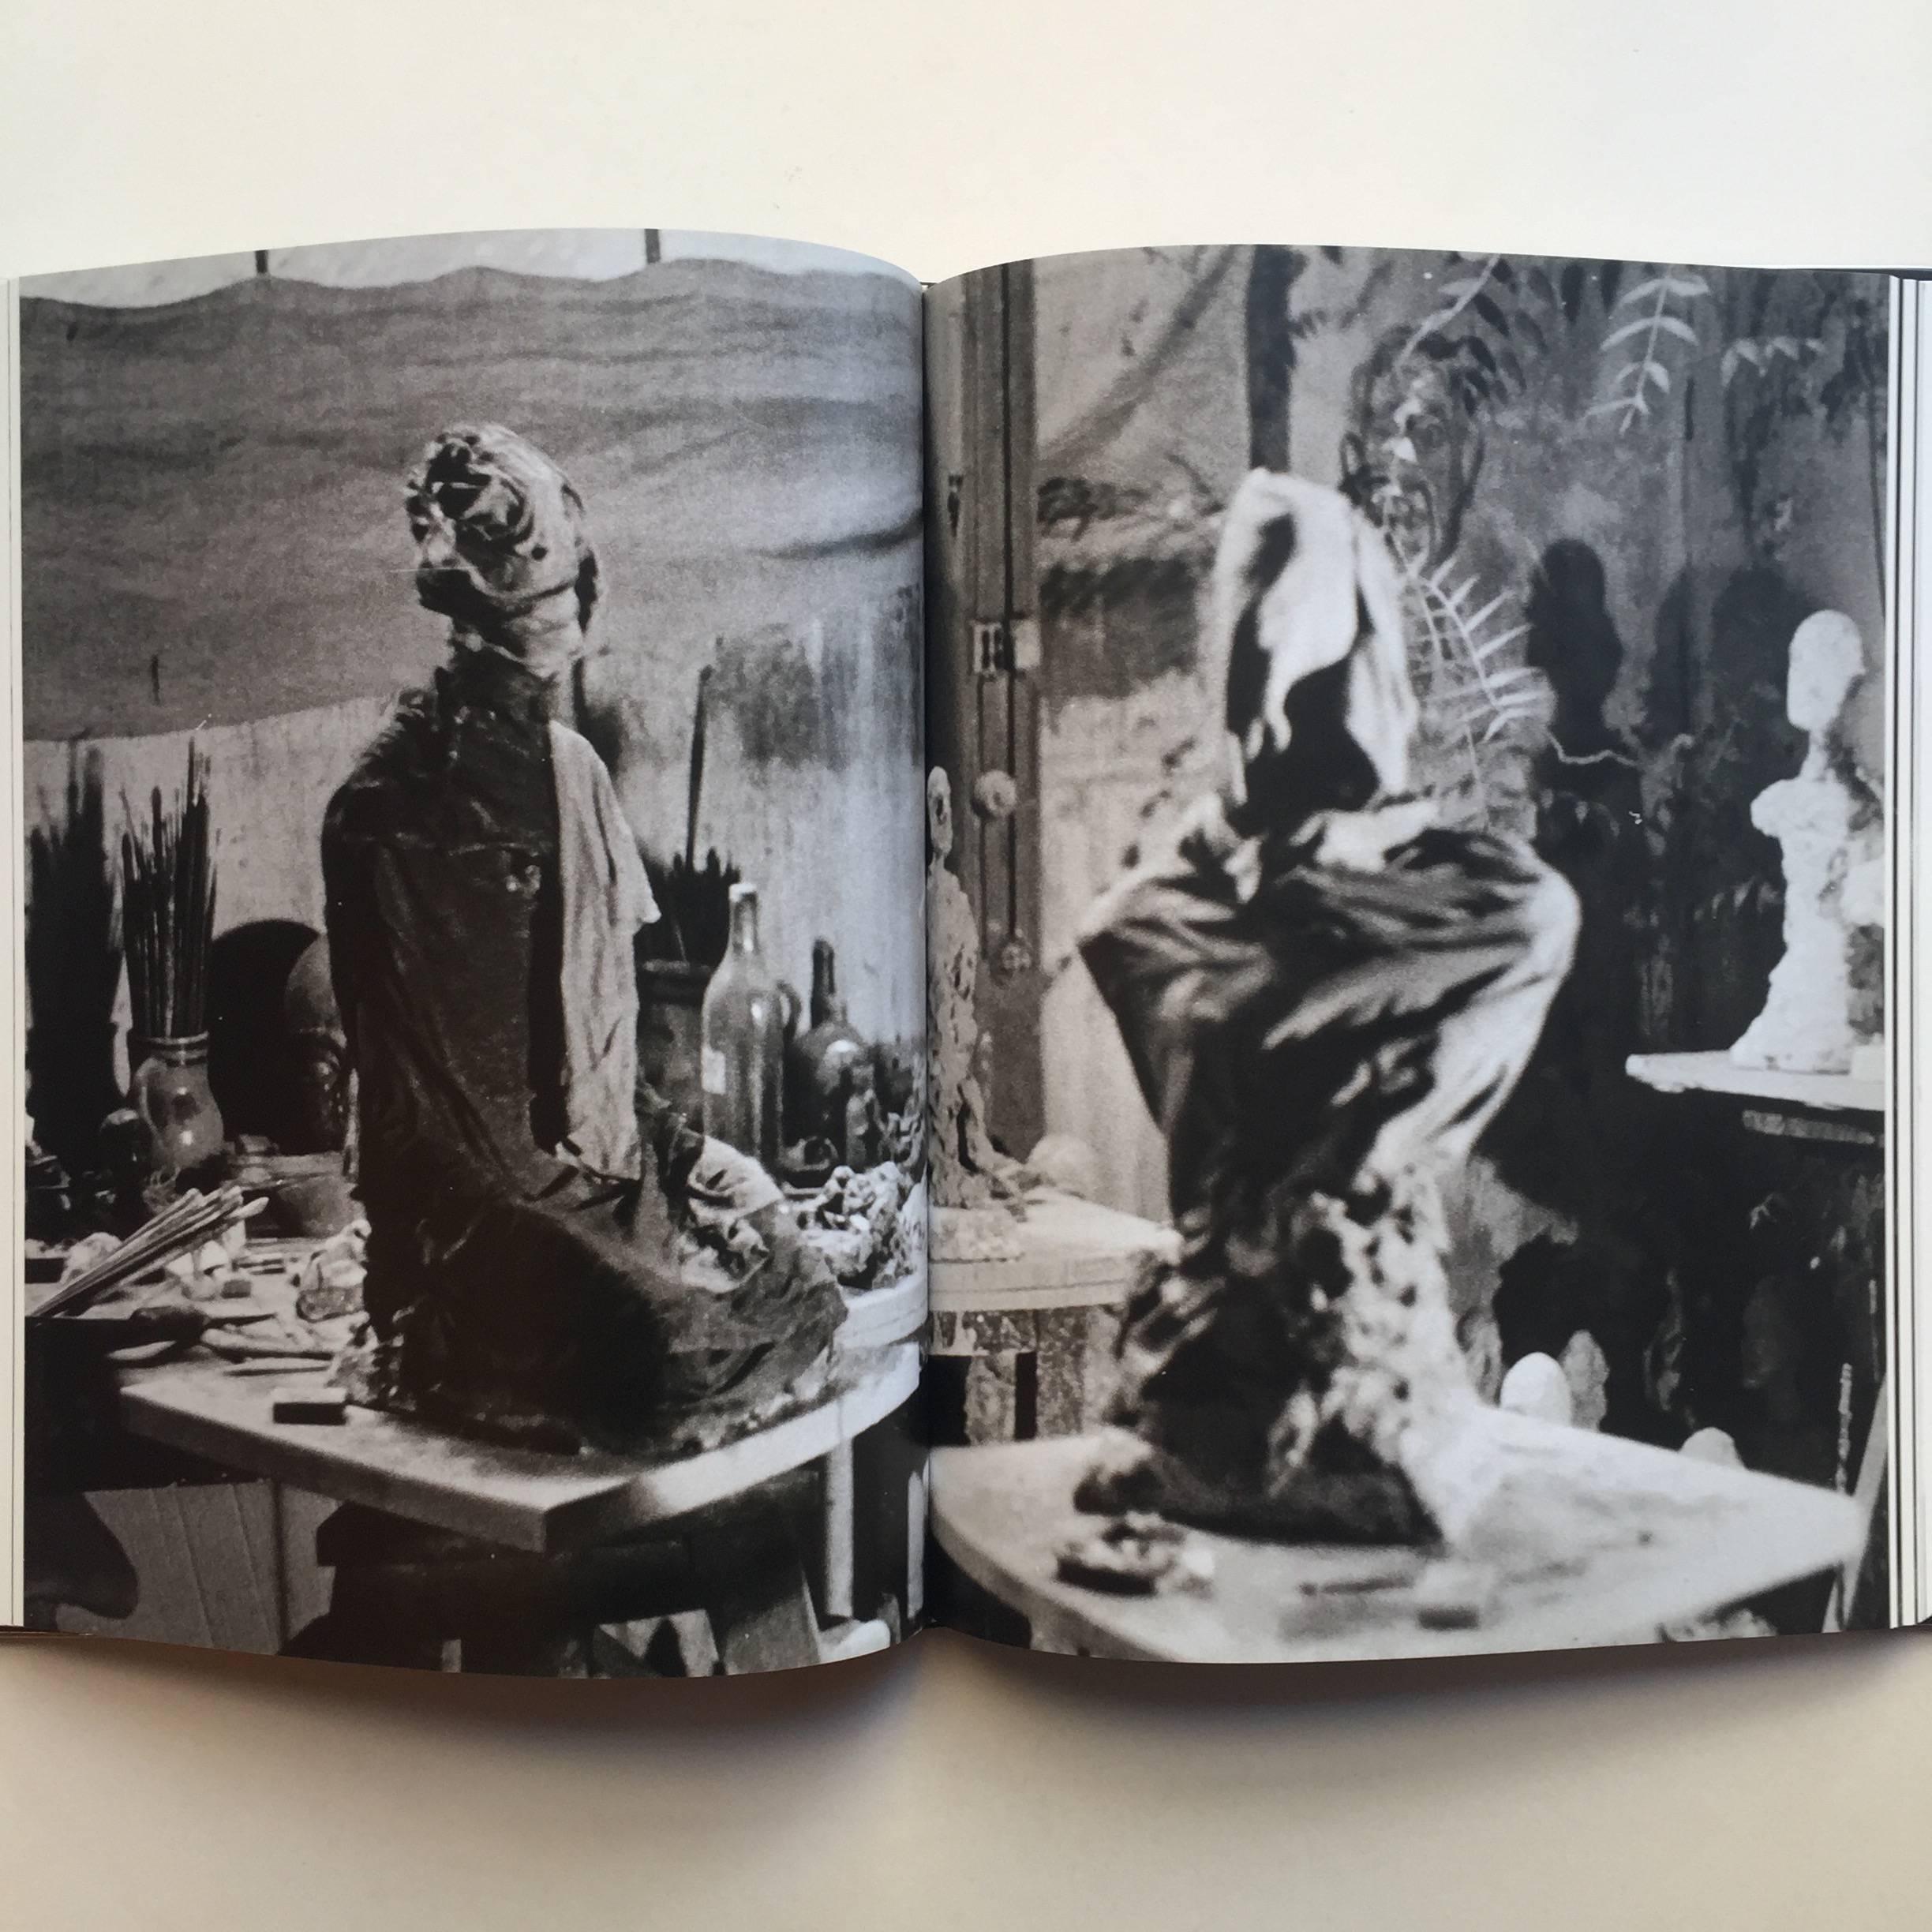 First edition, published by Yale University Press, 2010

This engaging book offers a peek into the ramshackle studio of one of the 20th centuries greatest sculptors. Situated behind Montparnasse, Alberto Giacometti lived and worked in this space